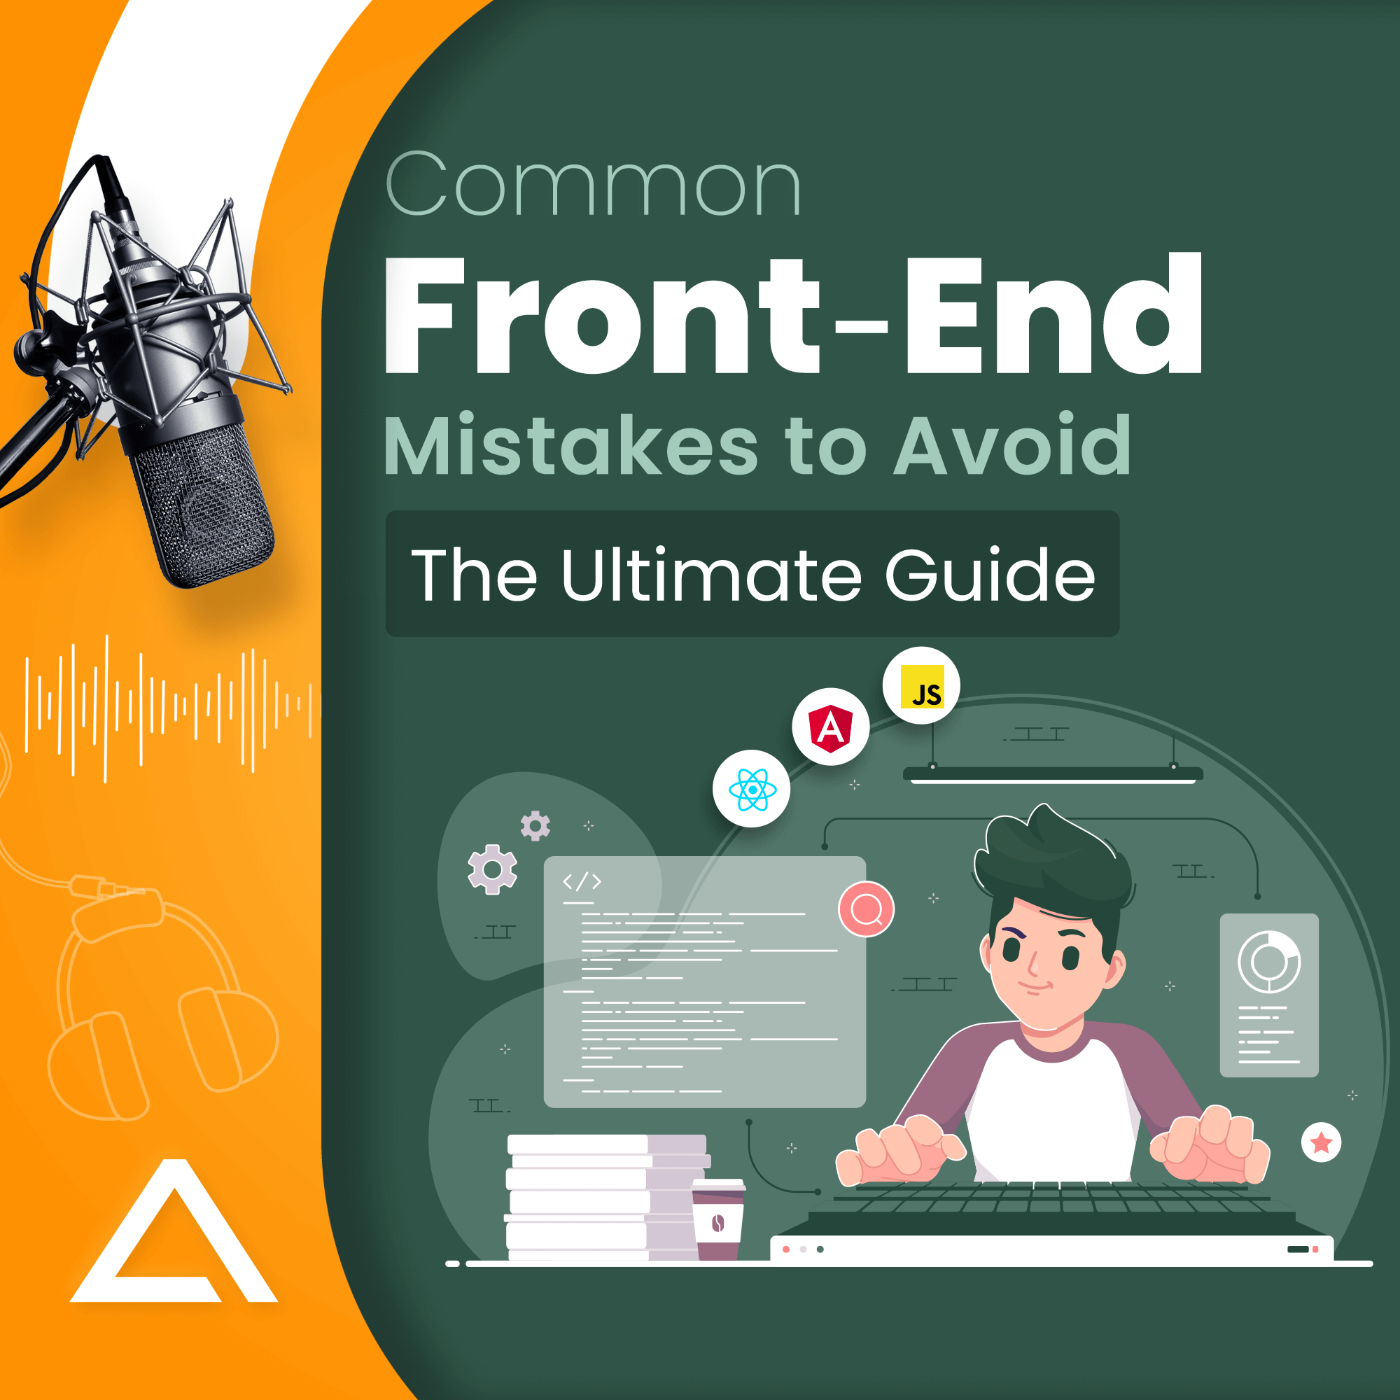 Common Front-End Mistakes to Avoid